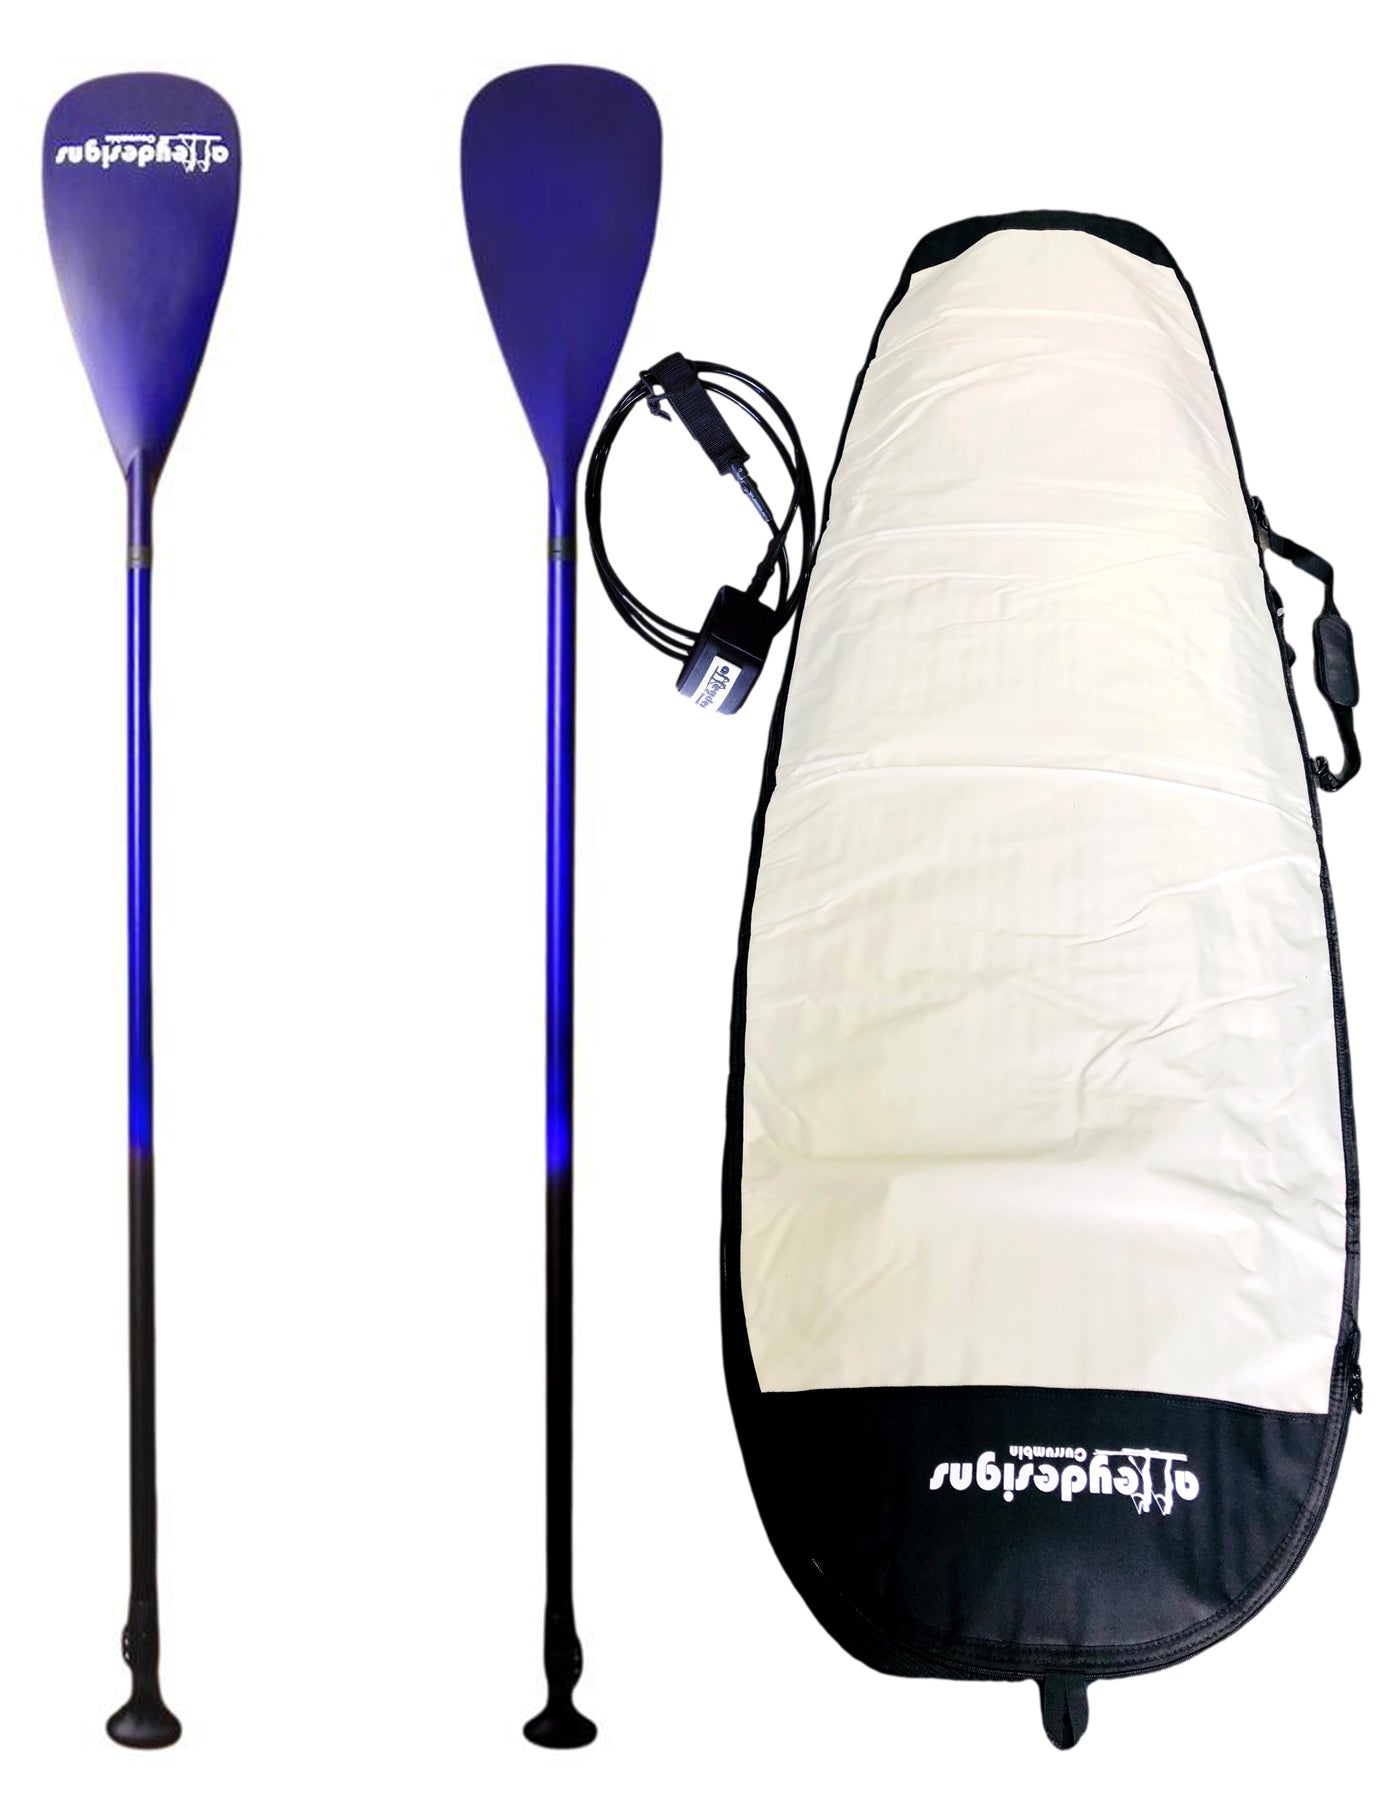 $350 SUP PADDLE COLOURED CARBON/FIBREGLASS ADJUSTABLE PADDLE & BOARD BAG  & LEG ROPE PACKAGE - Alleydesigns  Pty Ltd                                             ABN: 44165571264